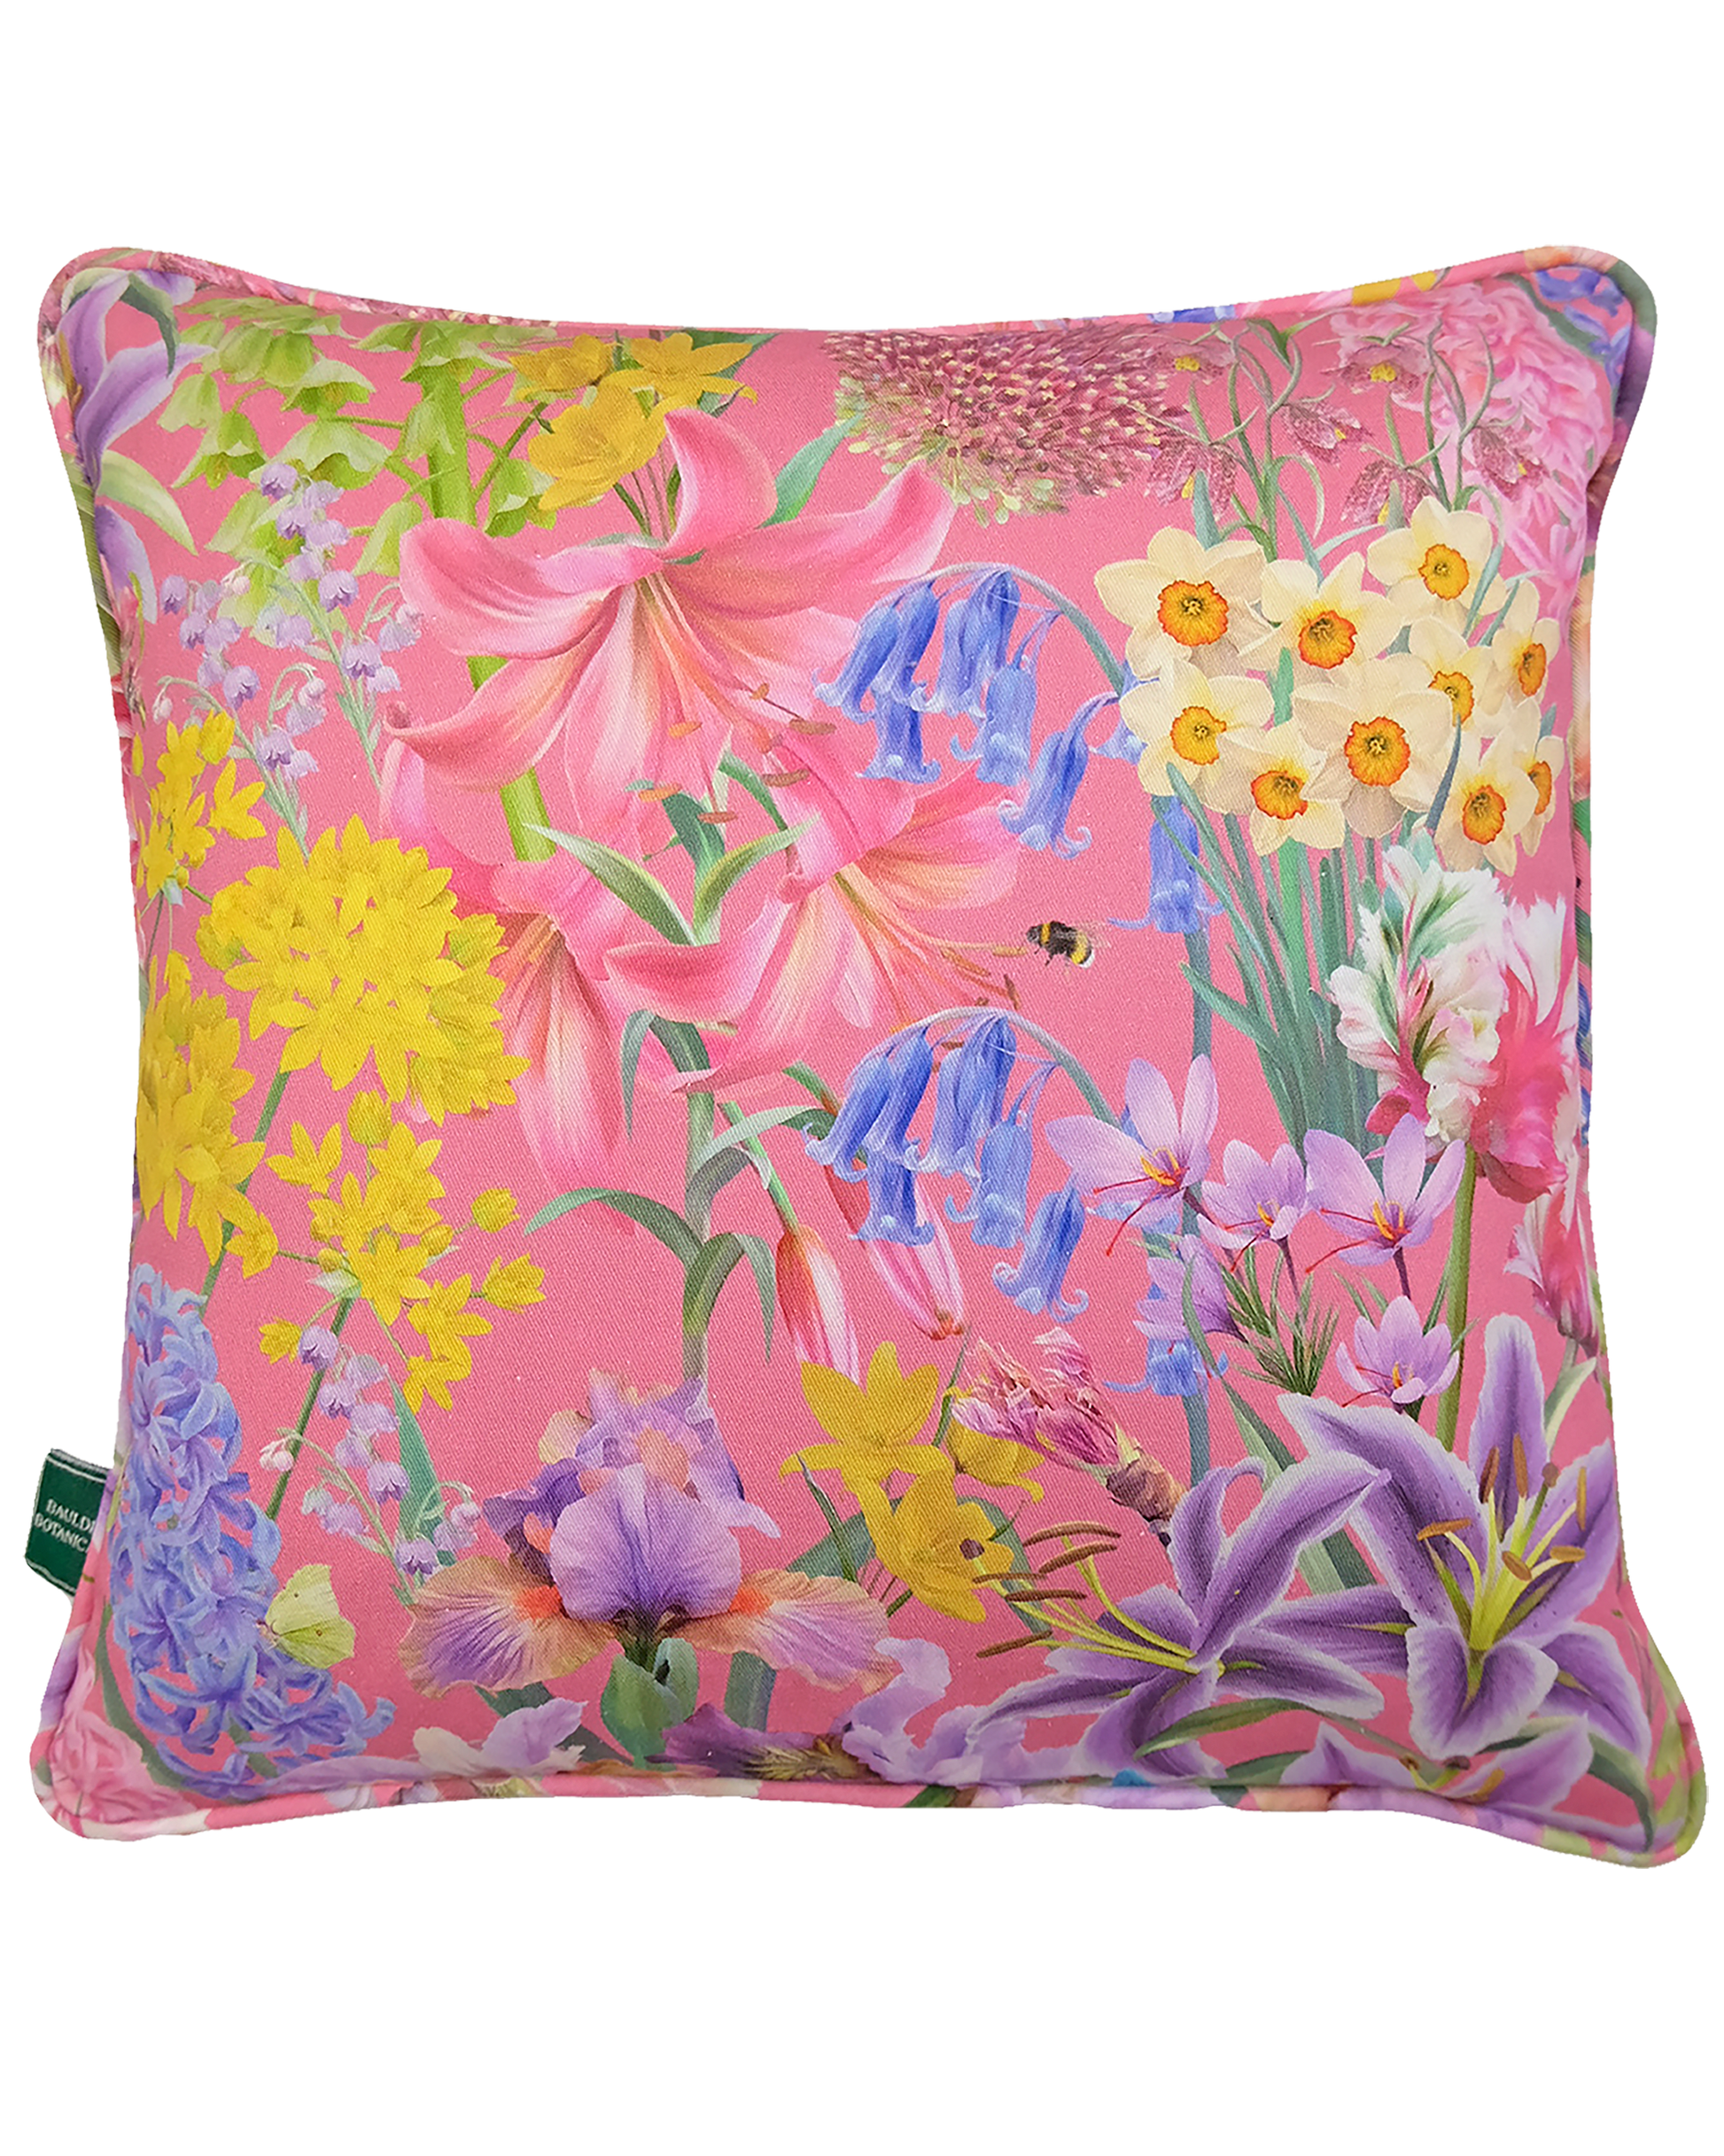 Hot pink eco friendly nature inspired pattern stylish scatter cushions for modern cottage interior design.